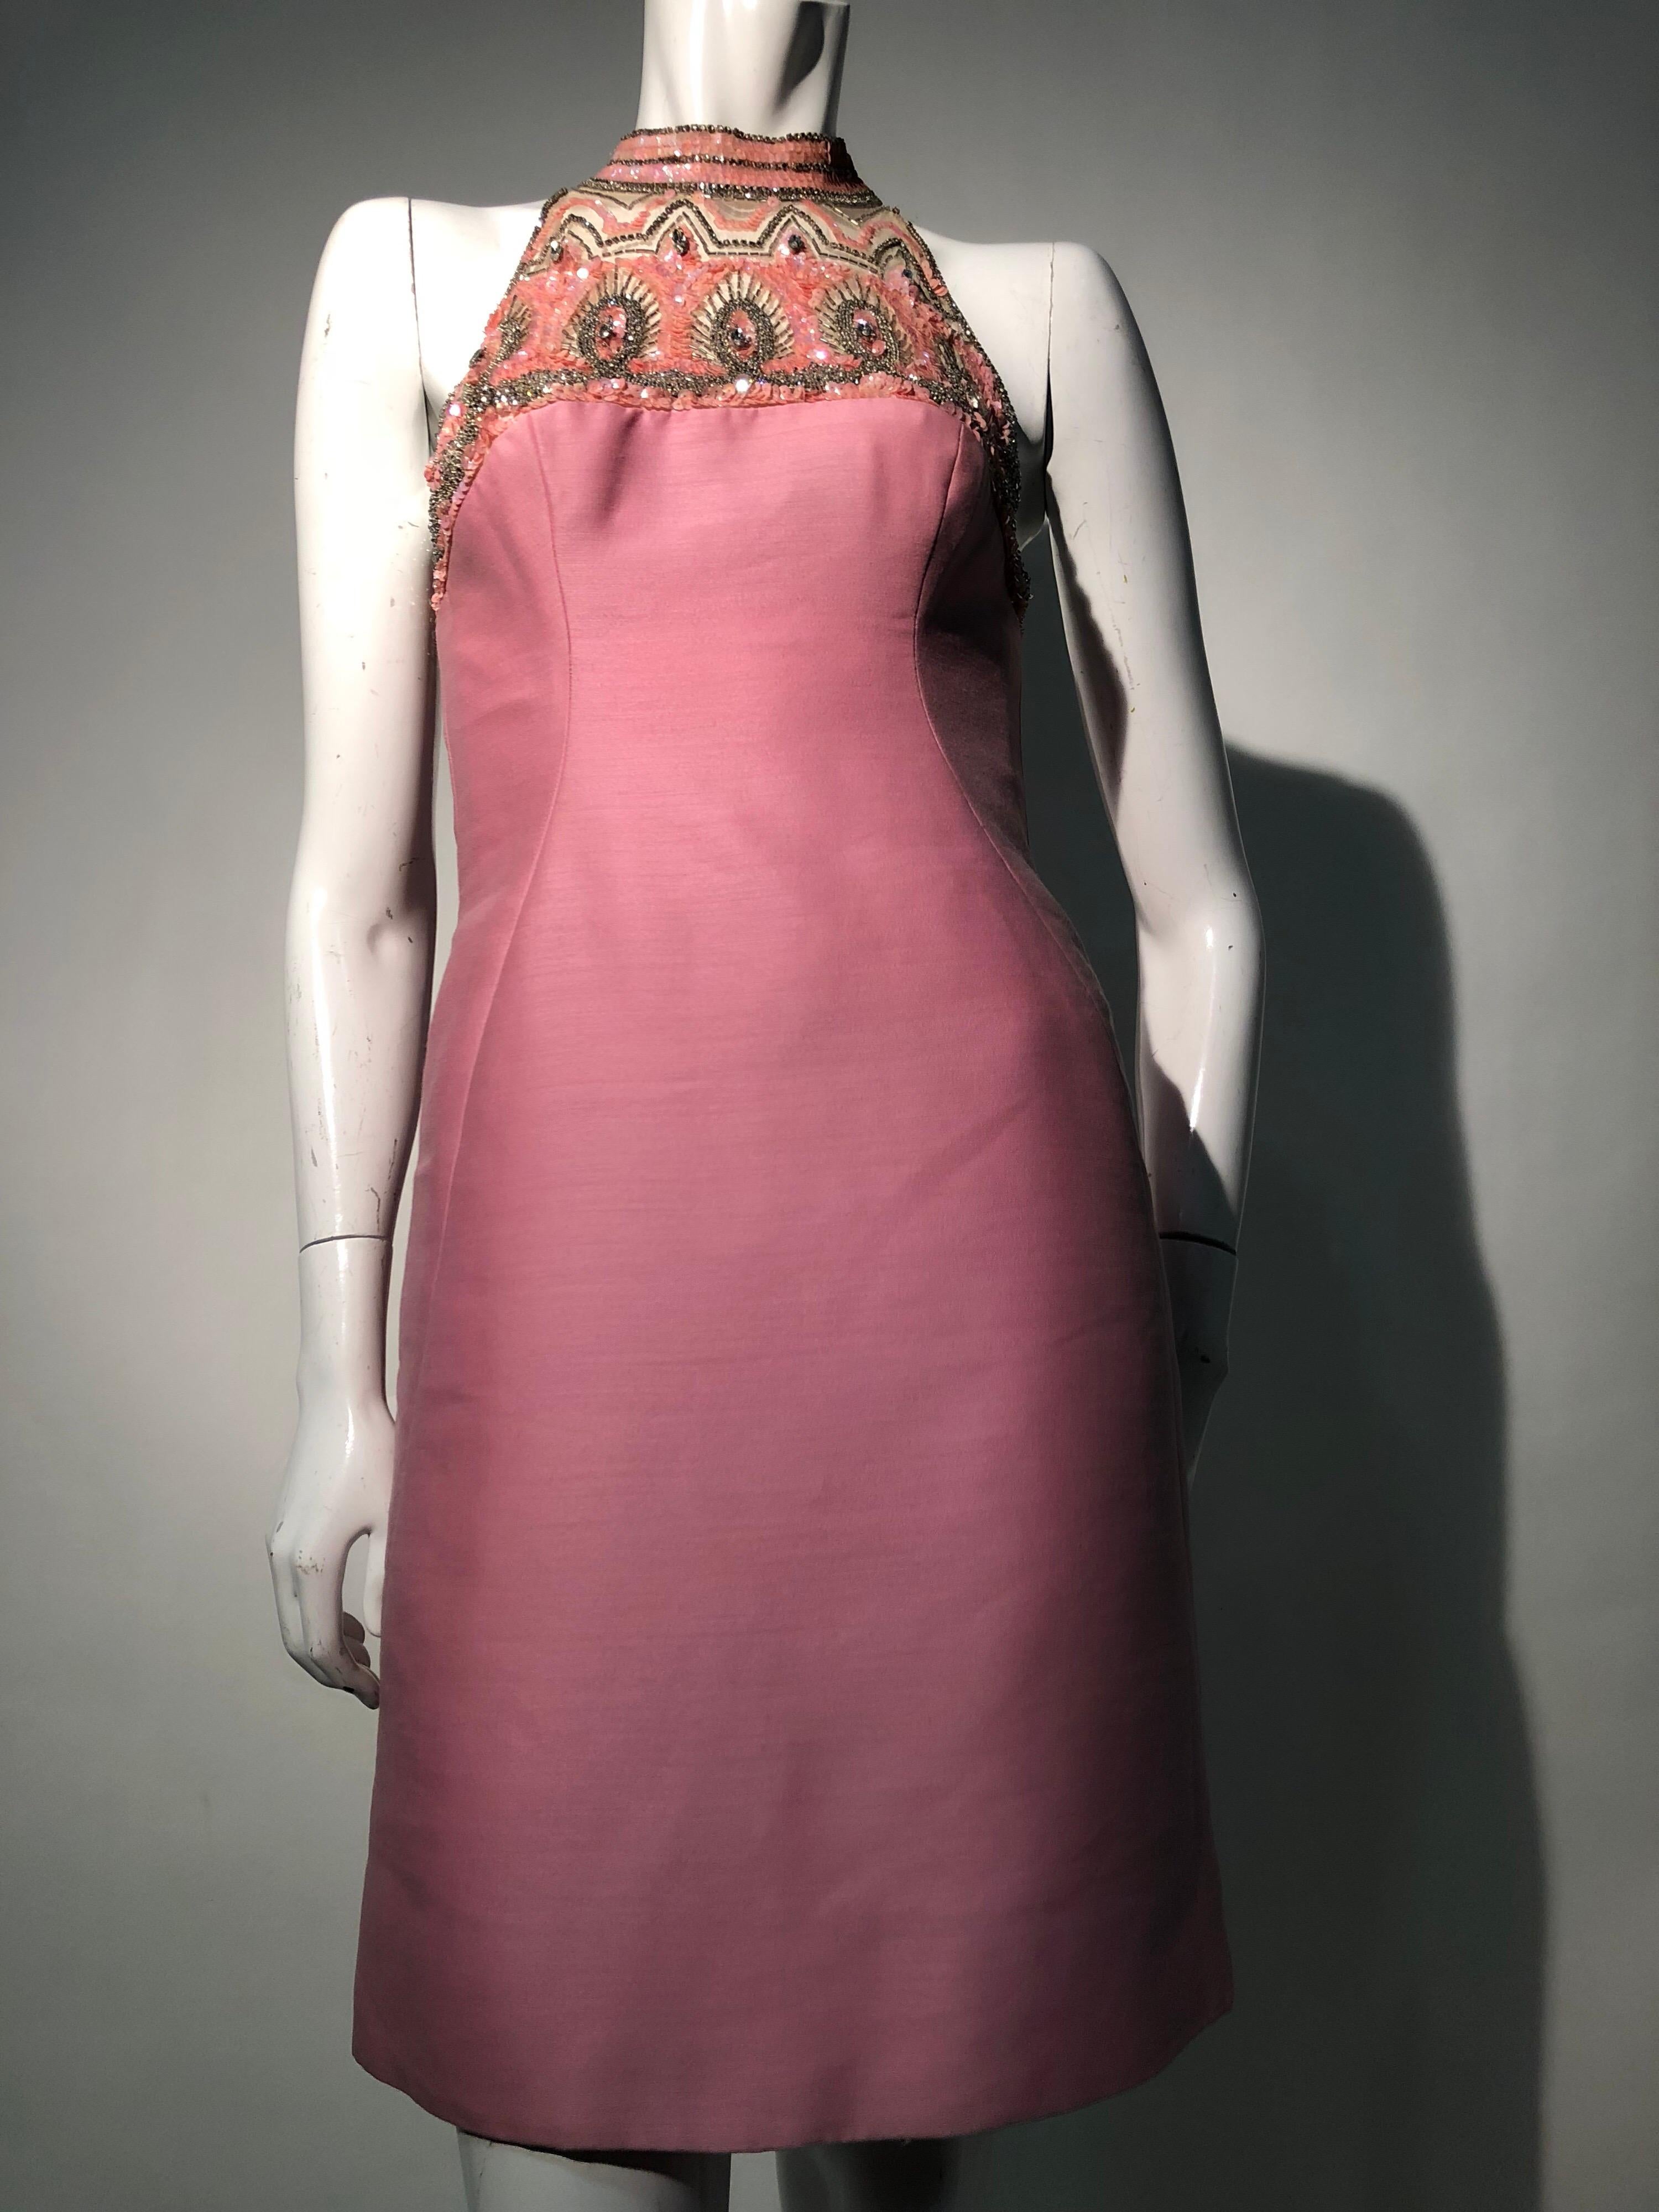 1960s Mr. Blackwell pink wool and silk sharkskin sheath dress with Egyptian-inspired sequin, rhinestones and beadwork on nude mesh neckline. Thin banded collar and back zipper. This dress is fully lined and cut in Blackwell's signature hourglass